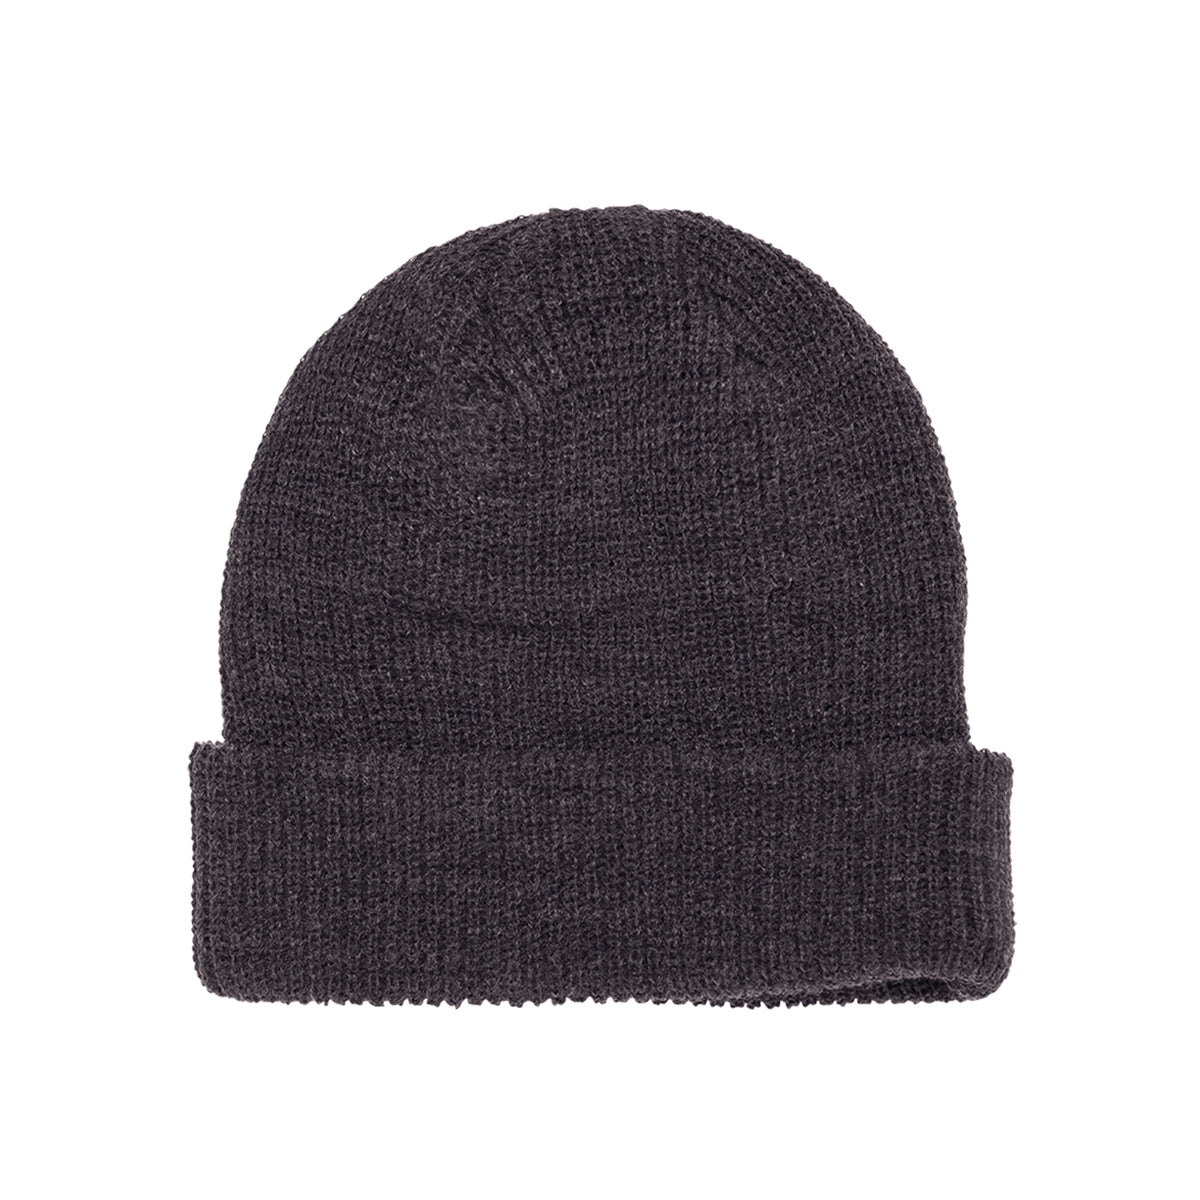 Flexfit Ribbed Cuff Beanie Beanies Yupoong-Ribbed Beanie Custom, Knit Blank – Cuffed Wholesale Knit and : | 2040USA Knit Beanies